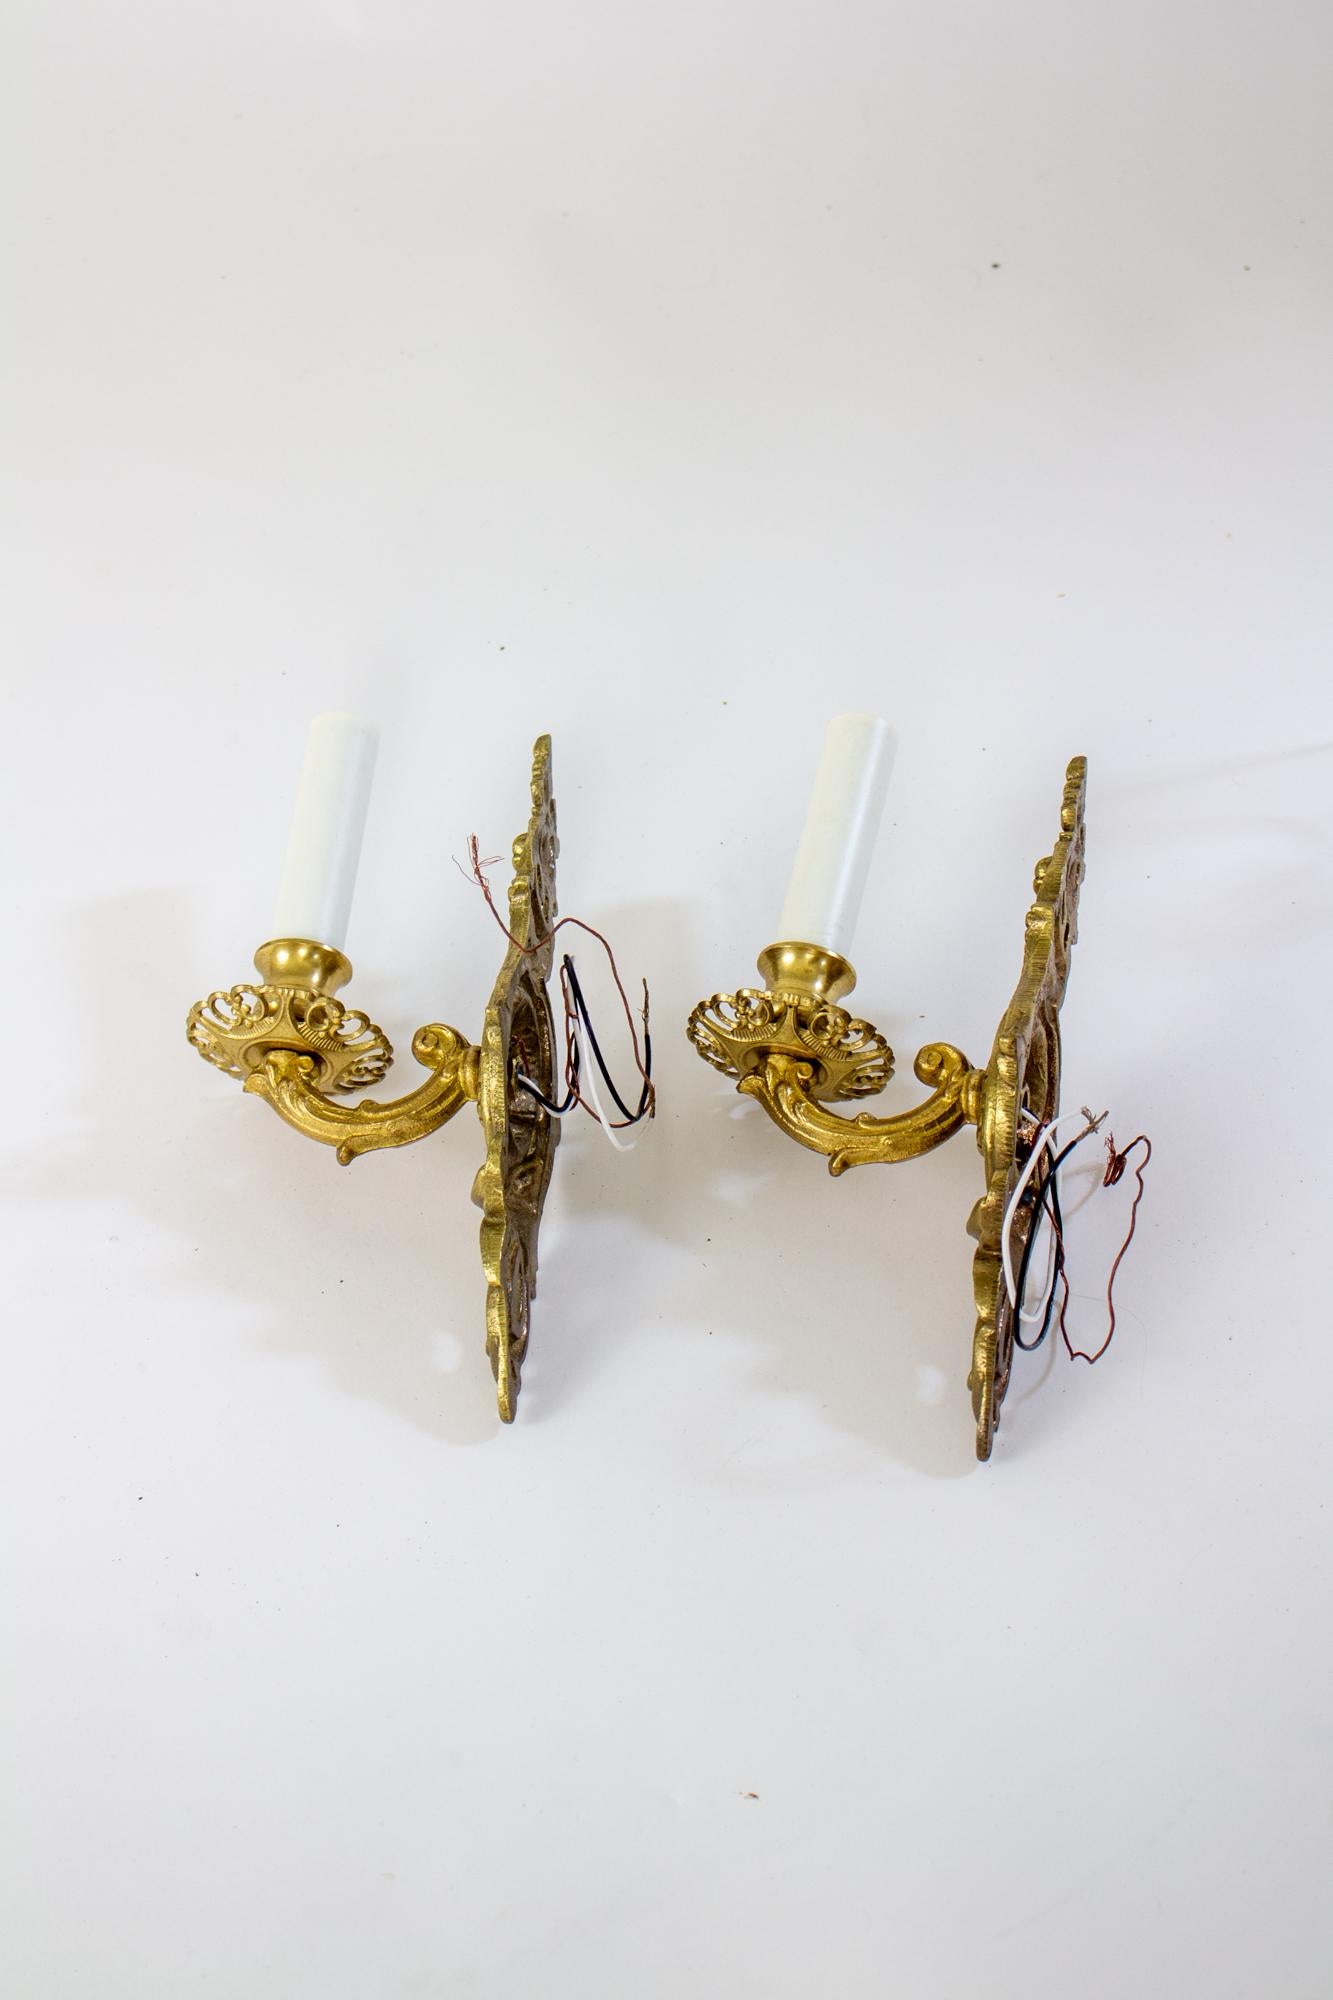 Early 20th century cast brass sconces, a pair. The backplates are from around the 1020’s, and the arms and bobeches were cast in the 1990’s, from traditional molds. The backplate is delicate and ornate, with flowers and swirled leaves. Metal in